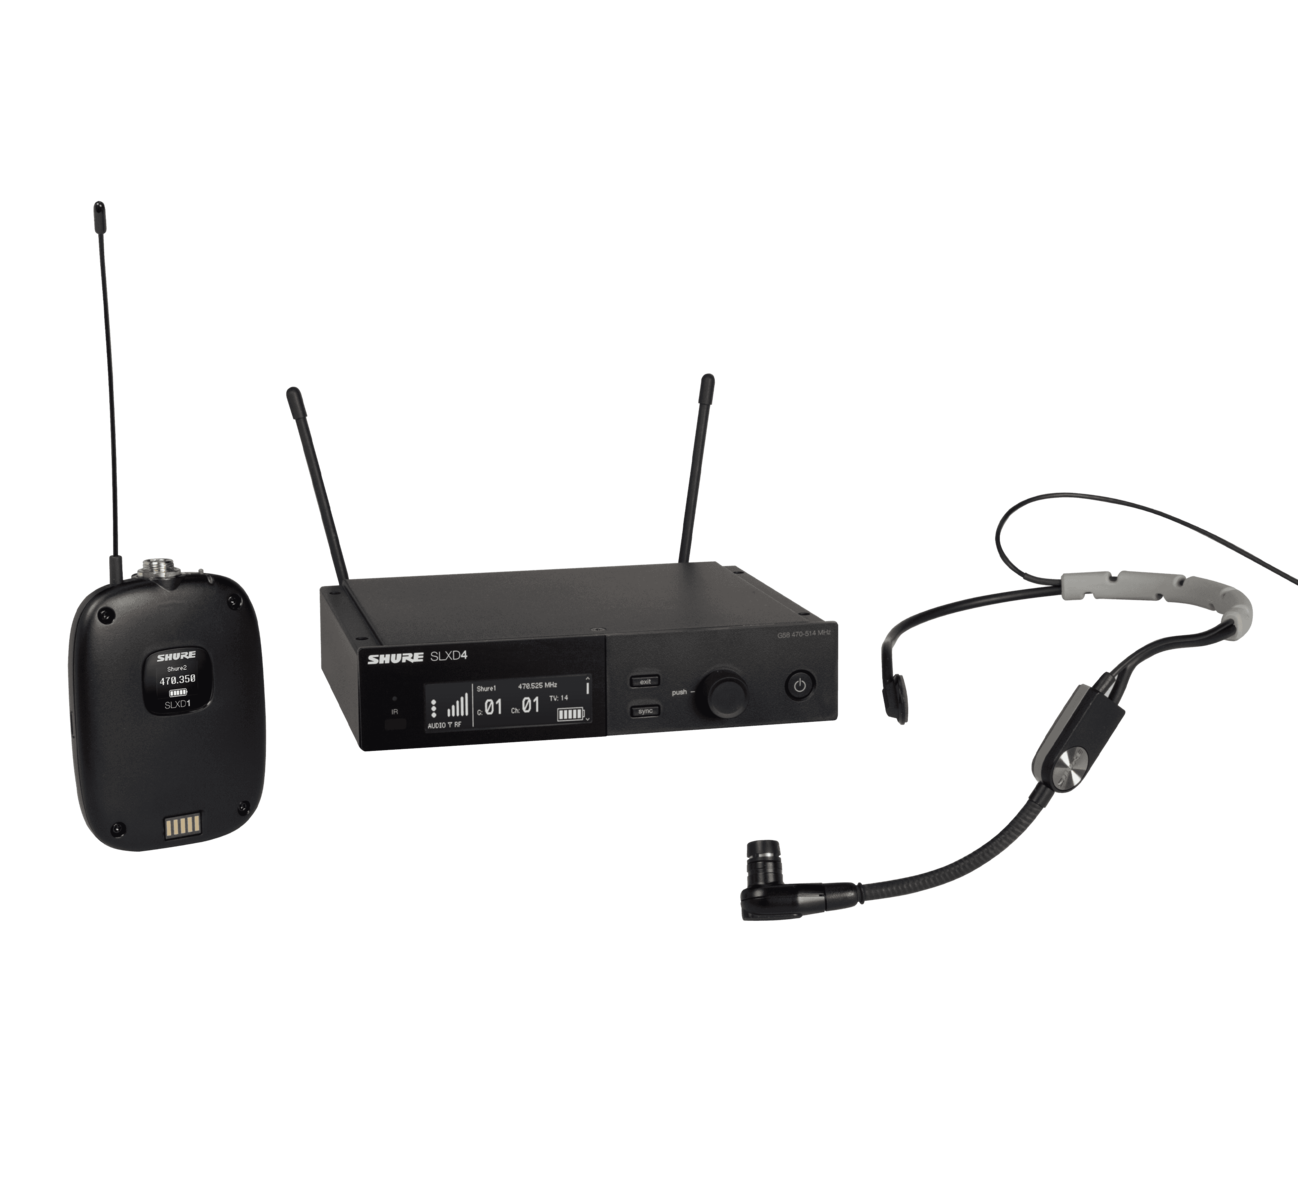 Shure SLXD14/SM35
(Wireless System with SLXD1 Bodypack Transmitter and SM35 Headset Microphone)